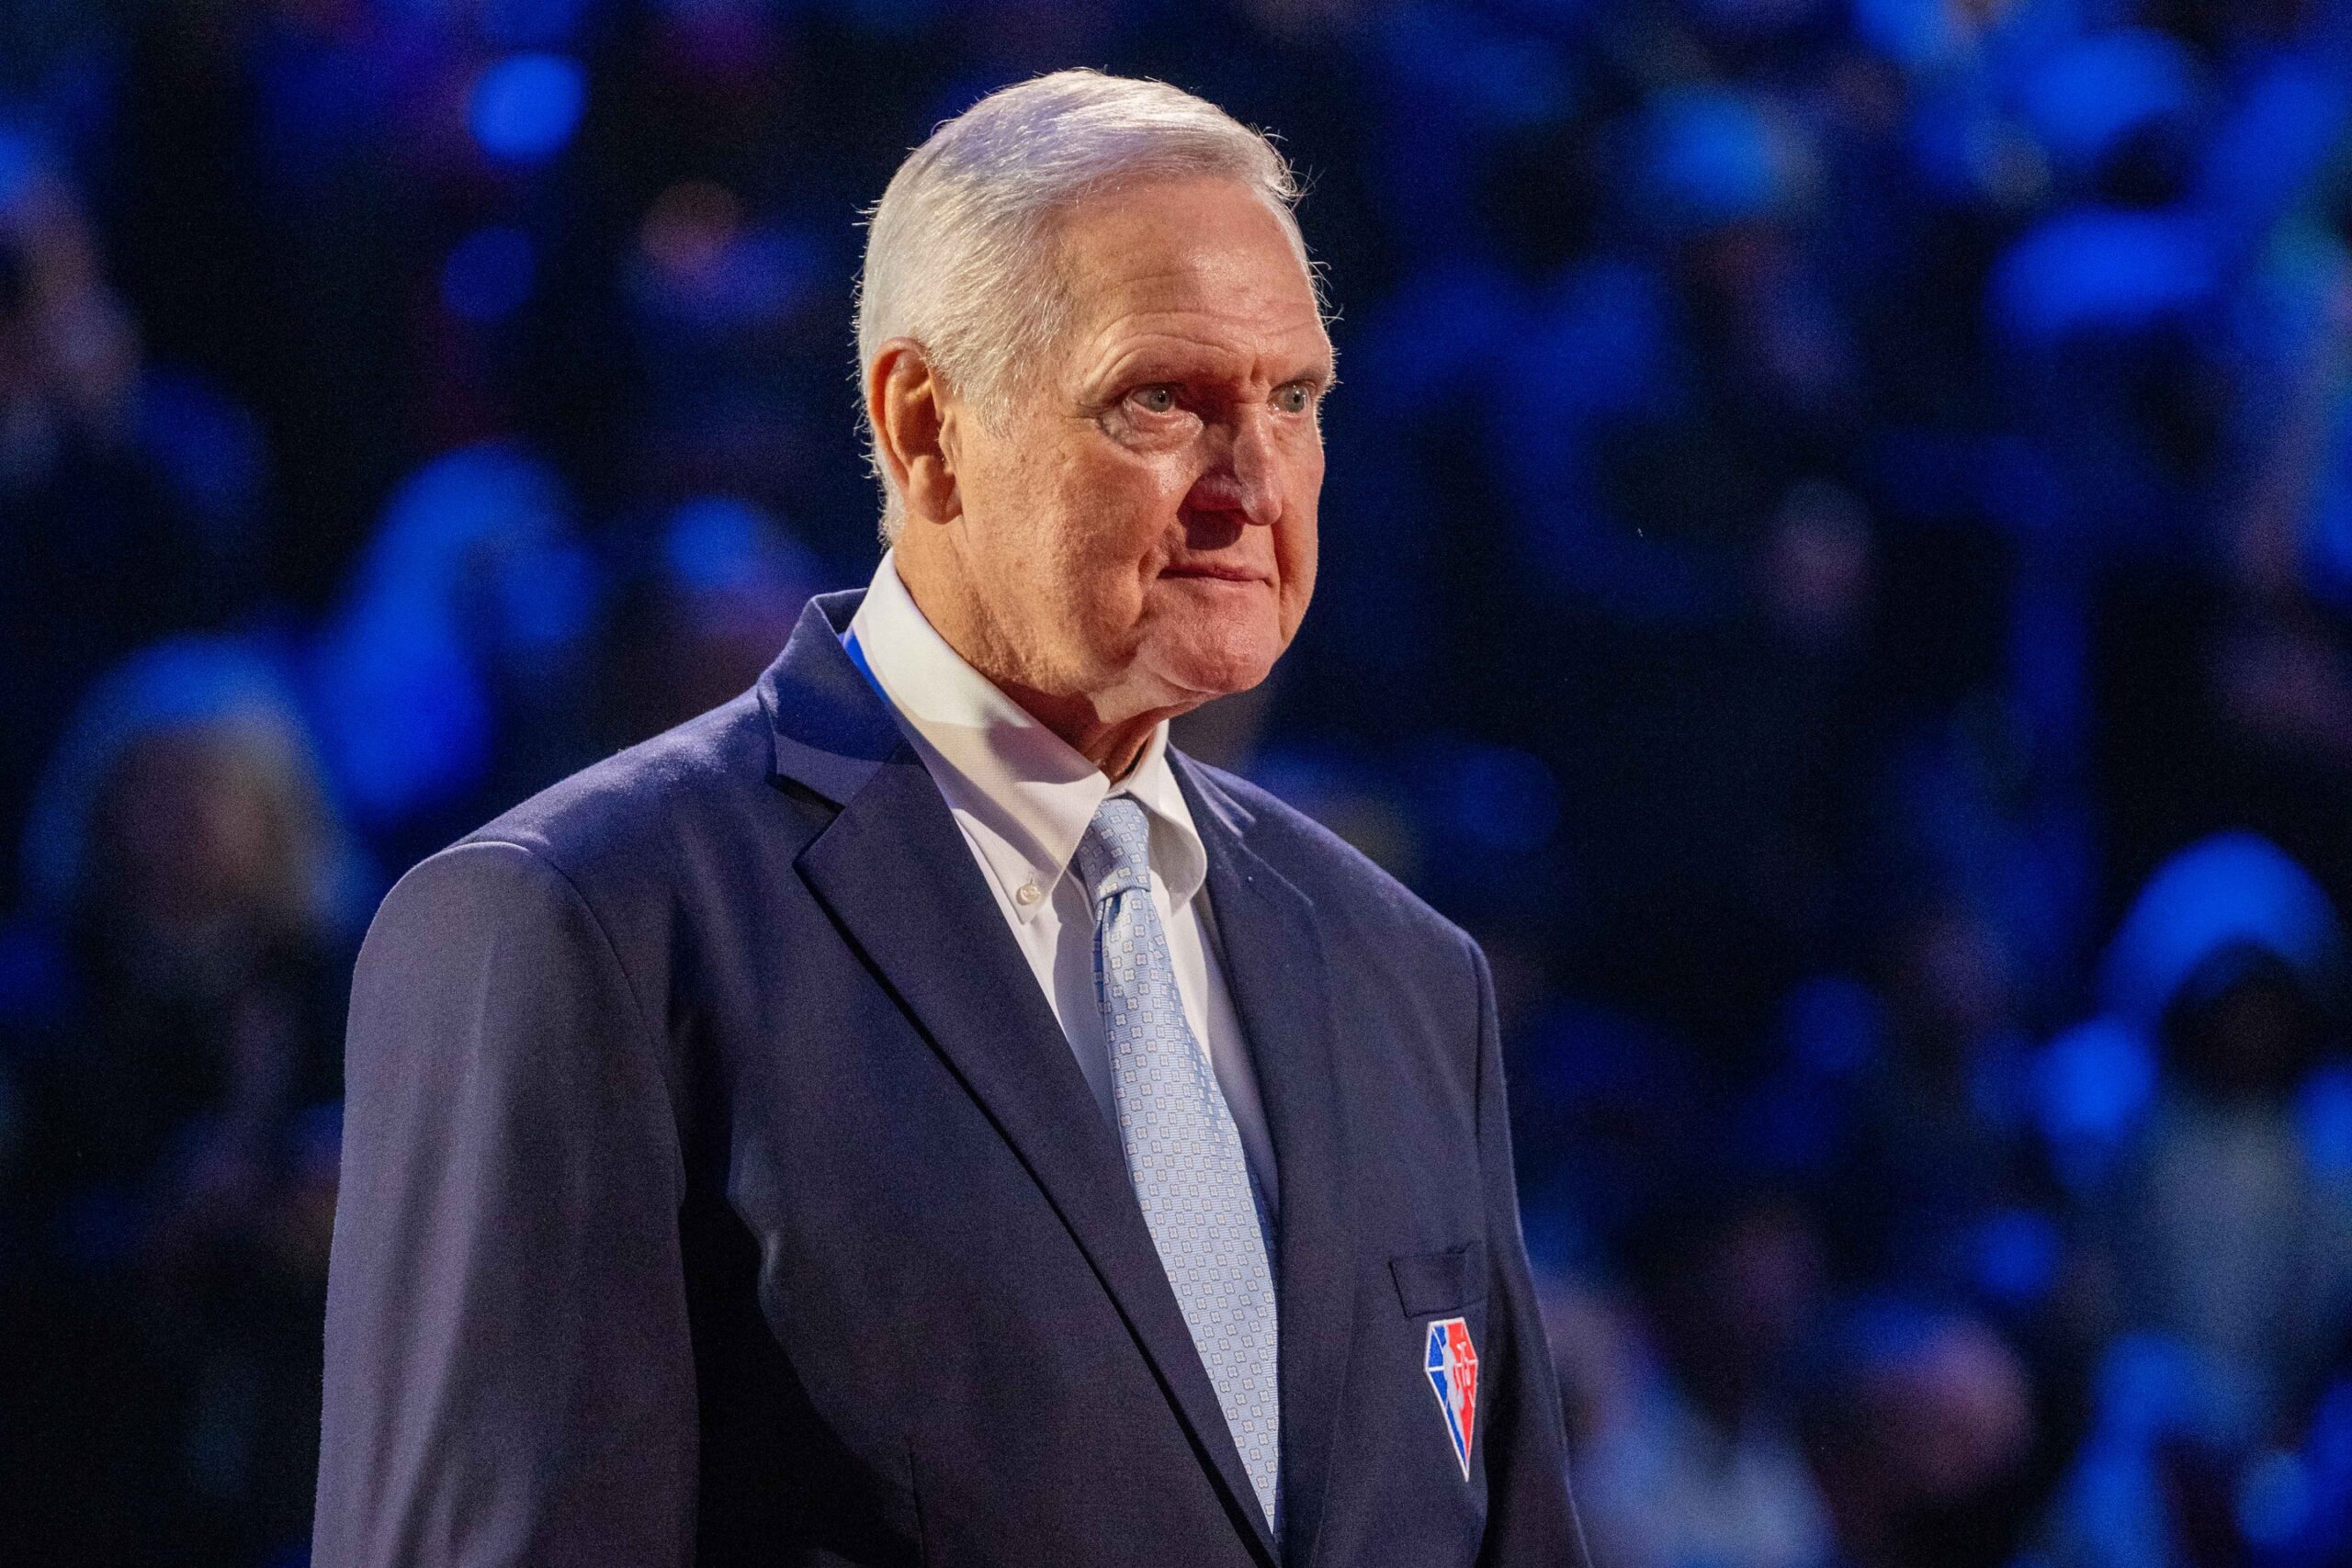 Jerry West made a trade with the Clippers which directly impacted the Pistons' future.